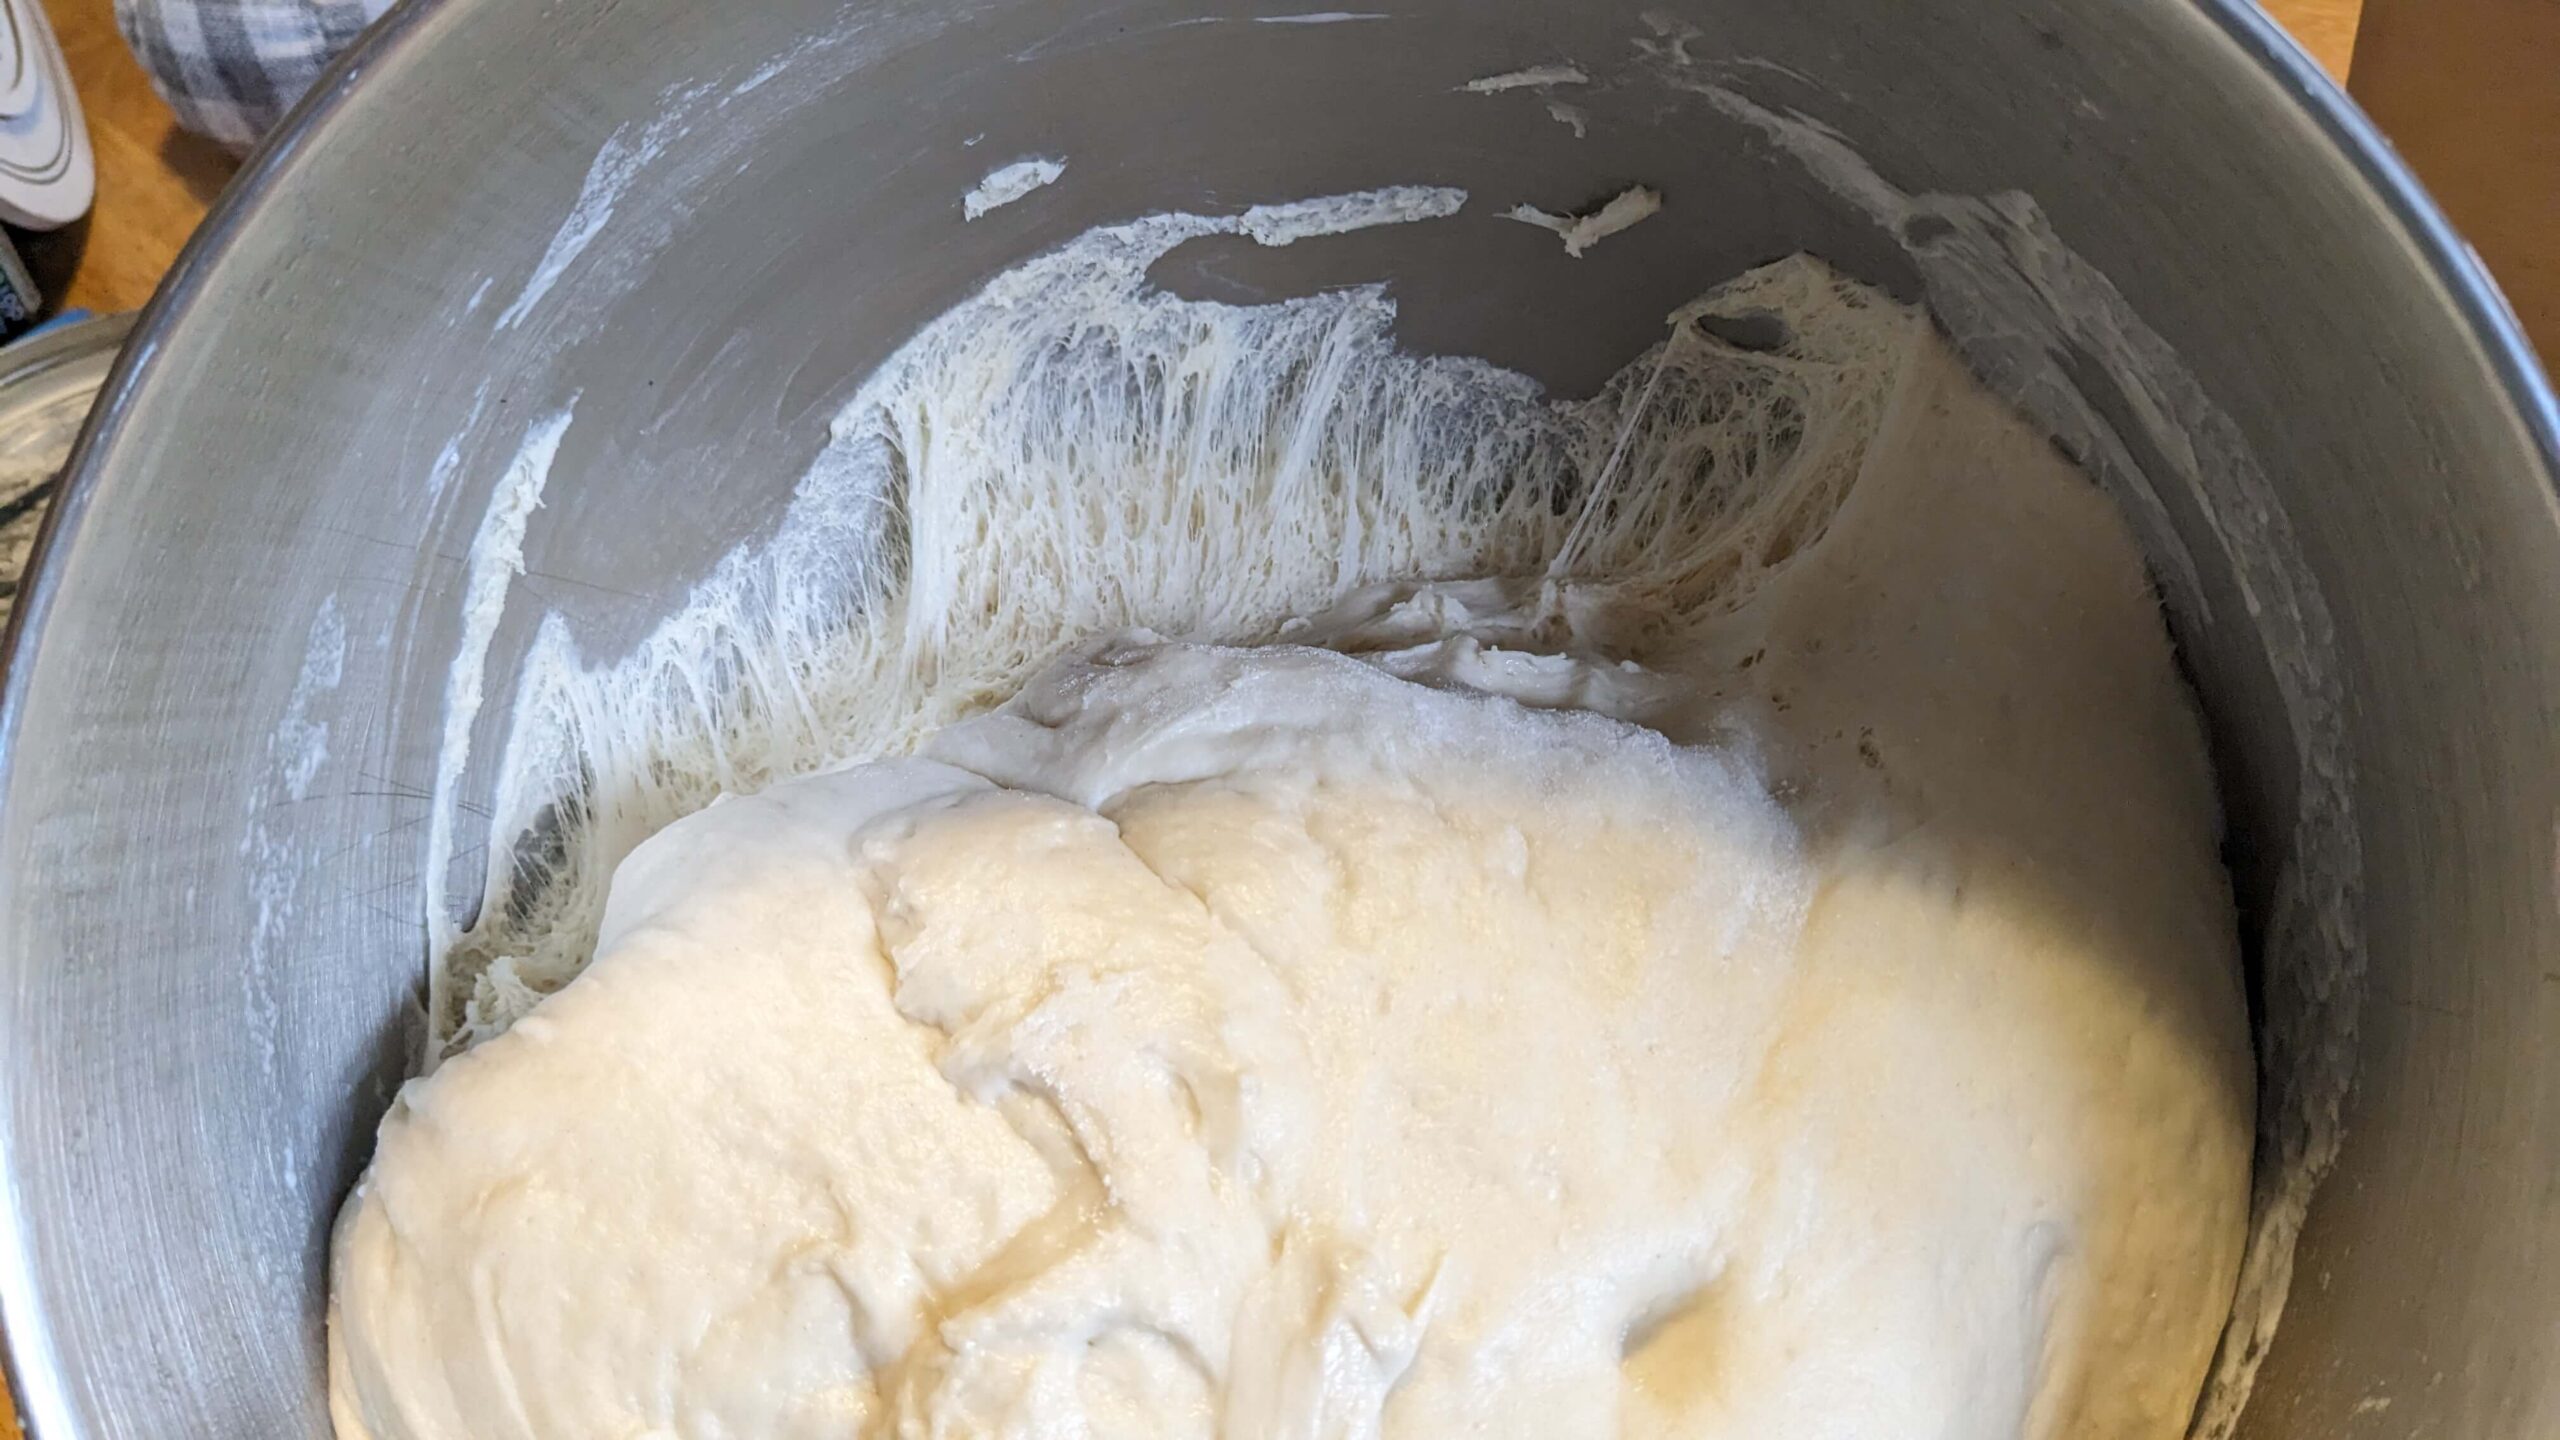 bread dough pulling away from the wall of a silver bowl